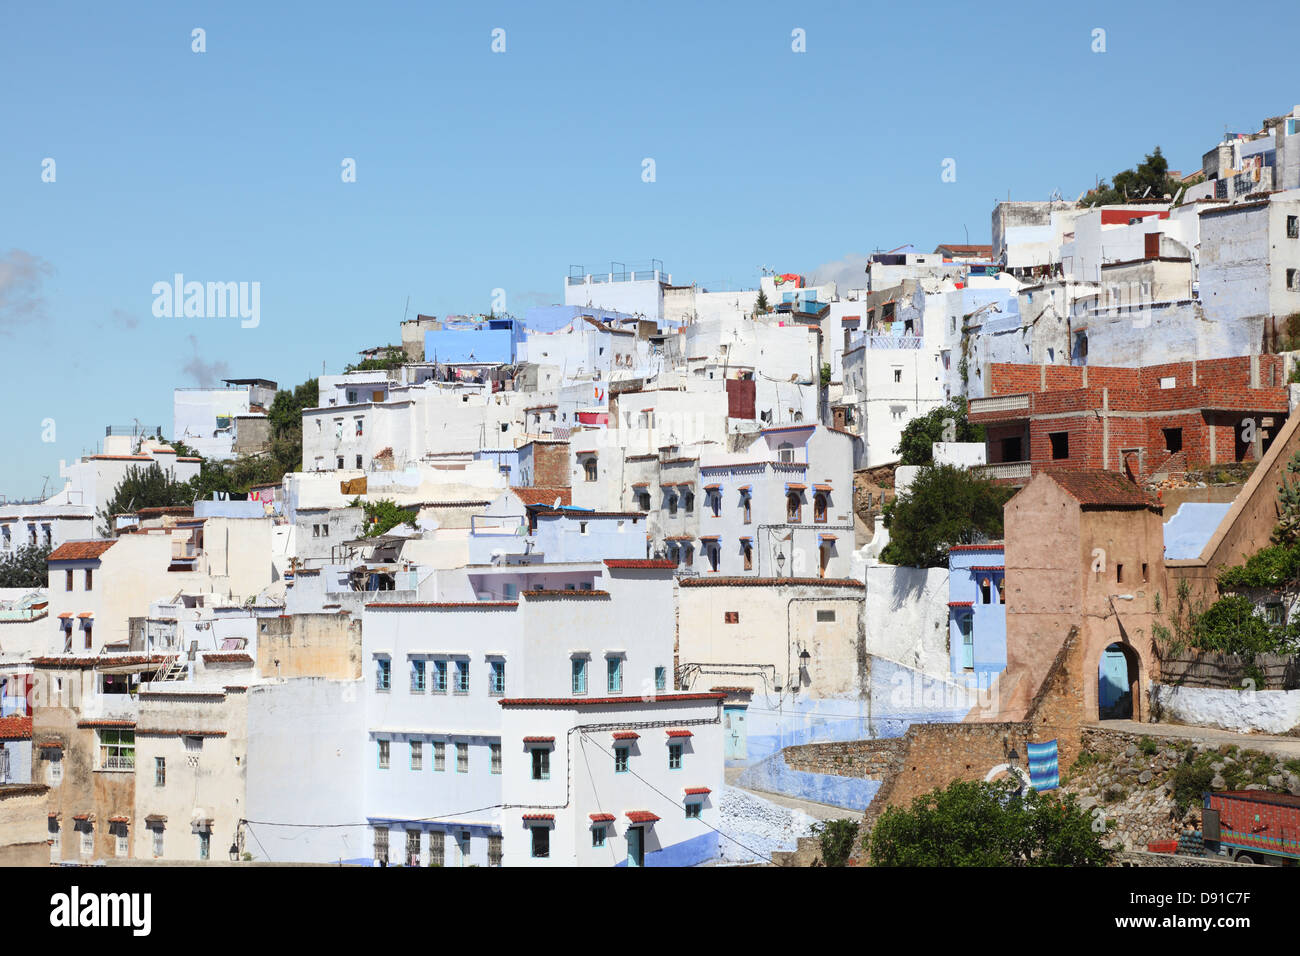 Colorful town Chefchaouen in Morocco Stock Photo